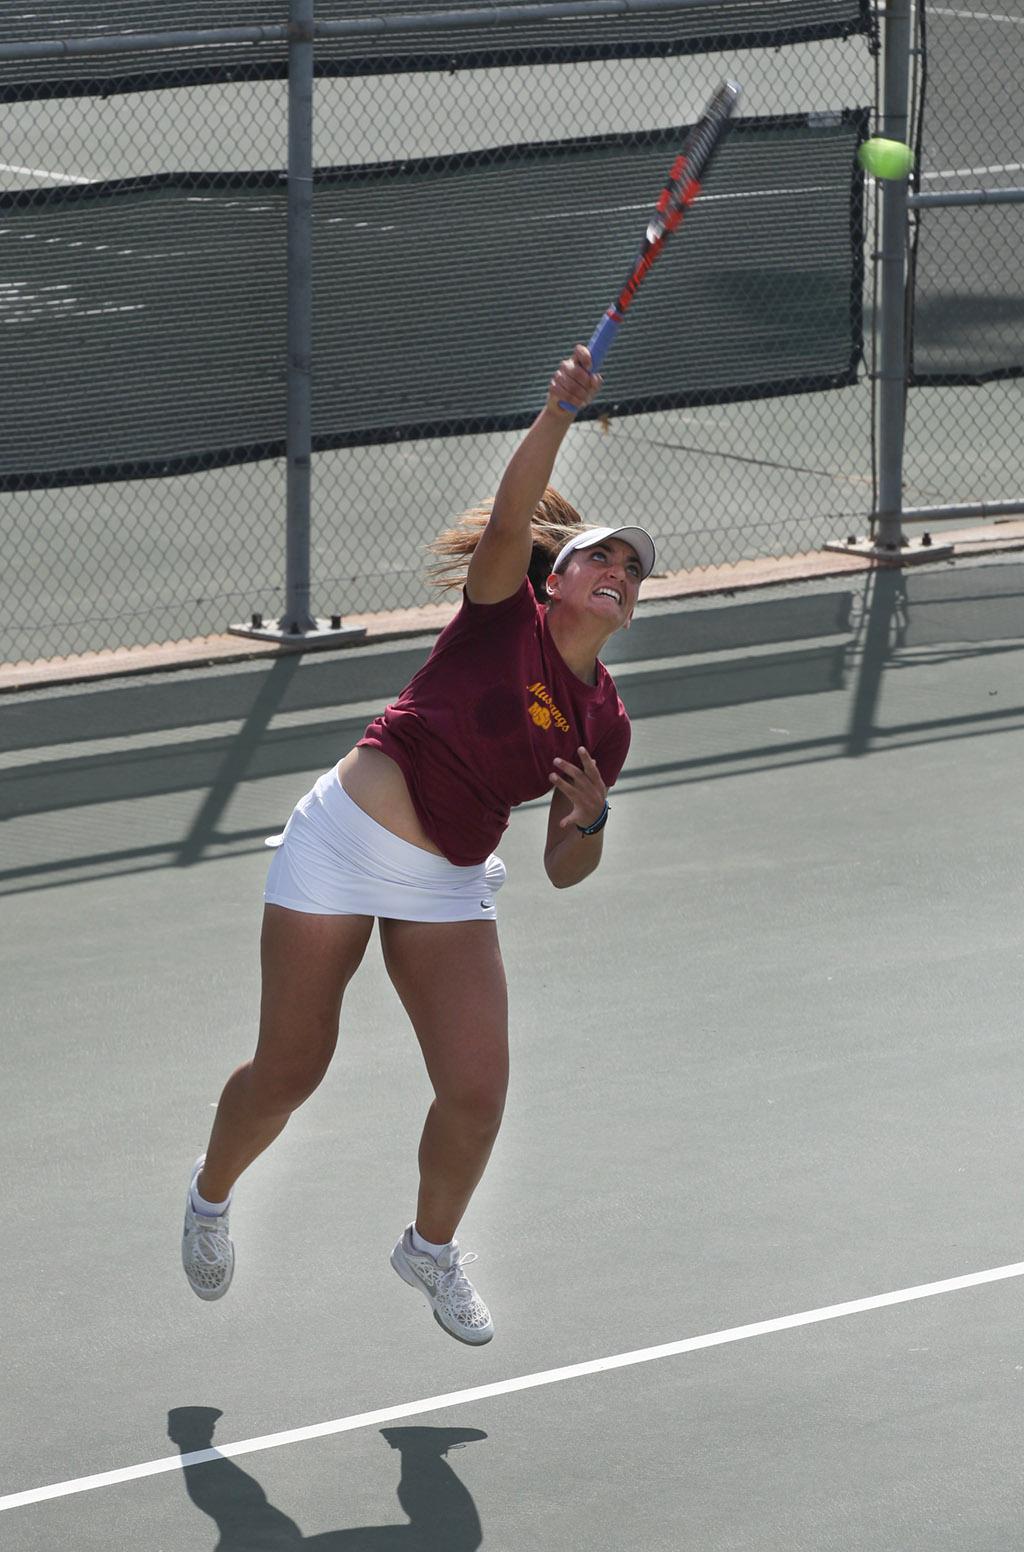 Eirini Kontaki, exercise physiology sophomore, serves the ball to the other side during a doubles game against Metro State at the MSU Tennis Center. Photo by Rachel Johnson